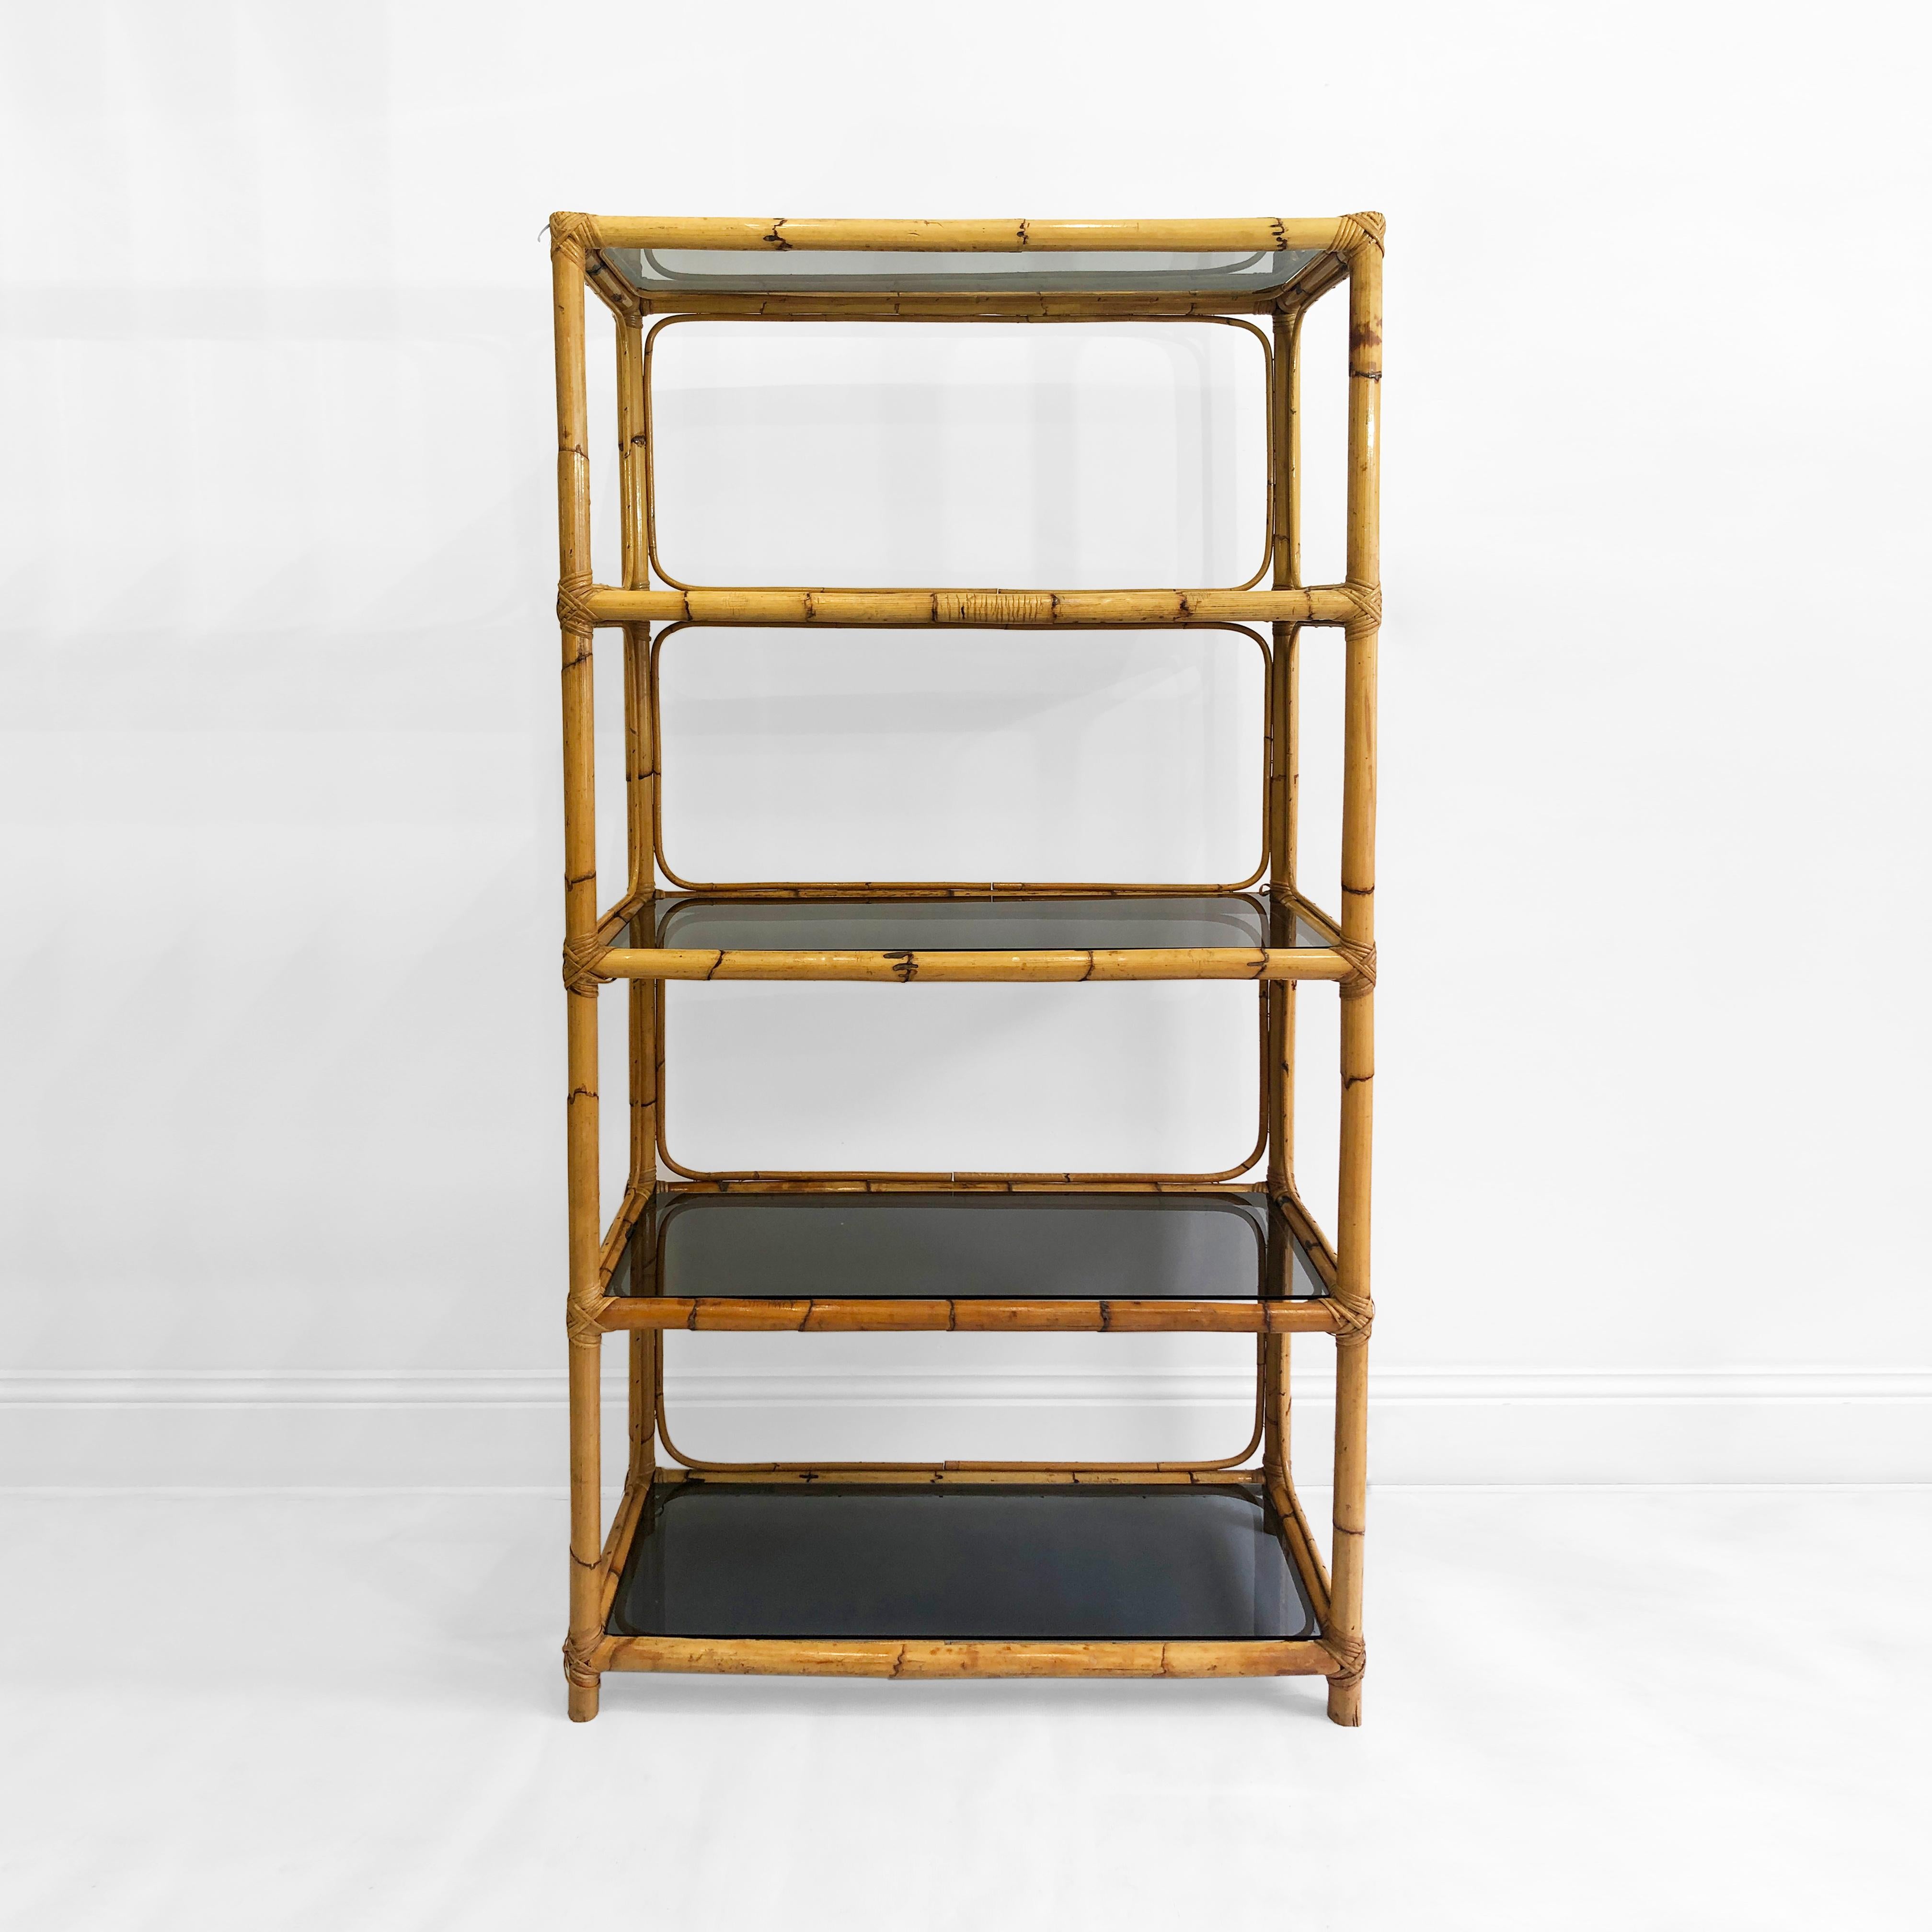 Vintage bamboo and smoked glass shelving etagere originated from Italy in the 1970s.

The etagere houses five smoked glass shelves which are surrounded by a thick bamboo frame. the joints of the frame are wrapped with rattan or bamboo extract